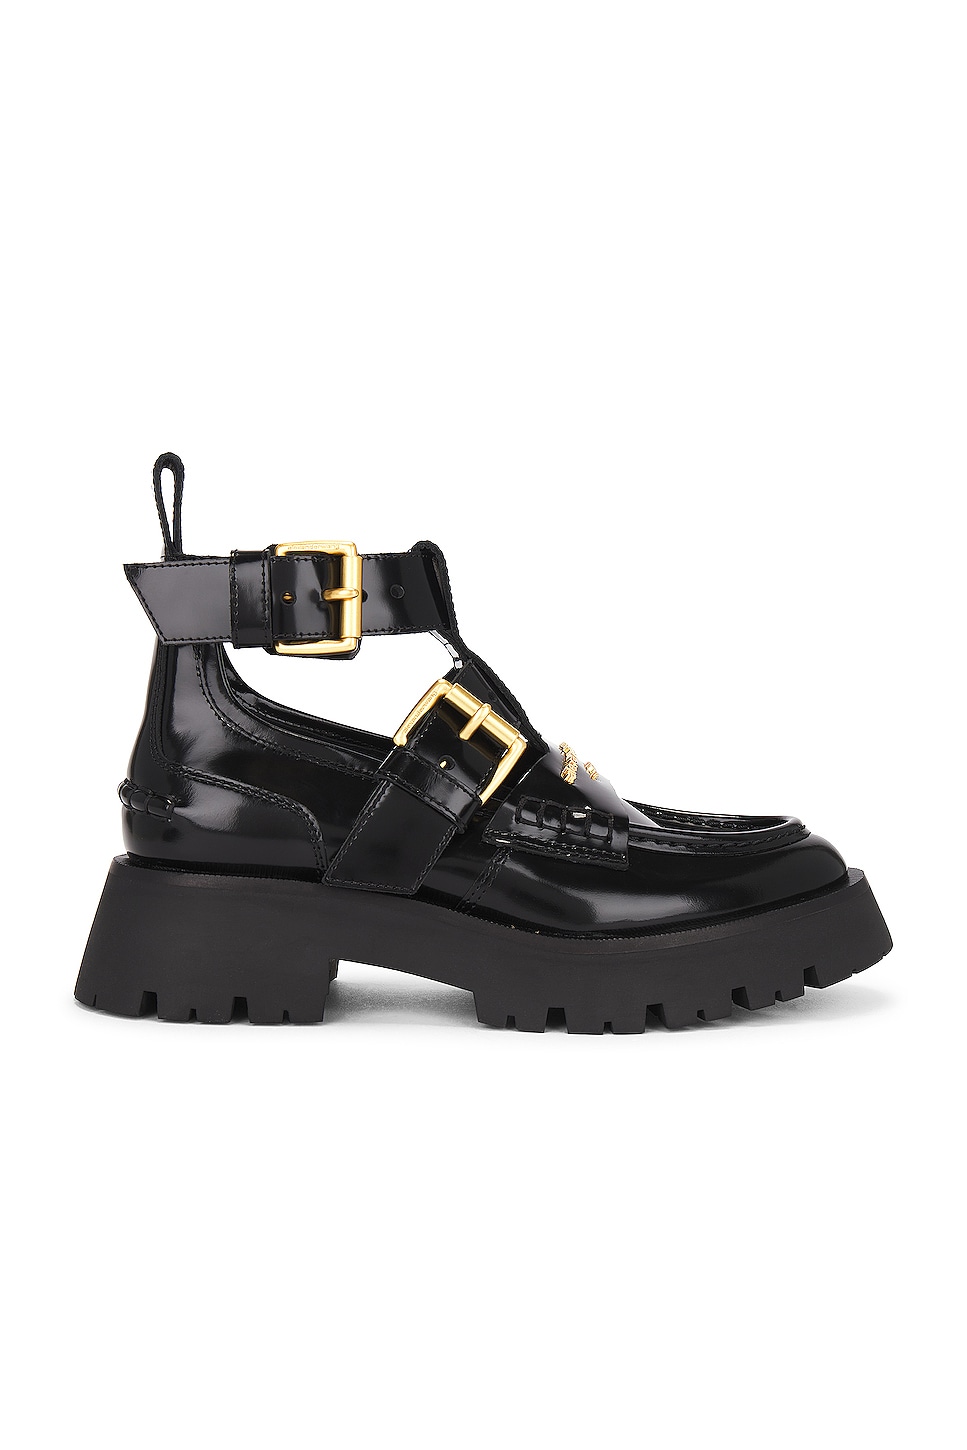 Image 1 of Alexander Wang Carter Lug Ankle Strap Boot in Black